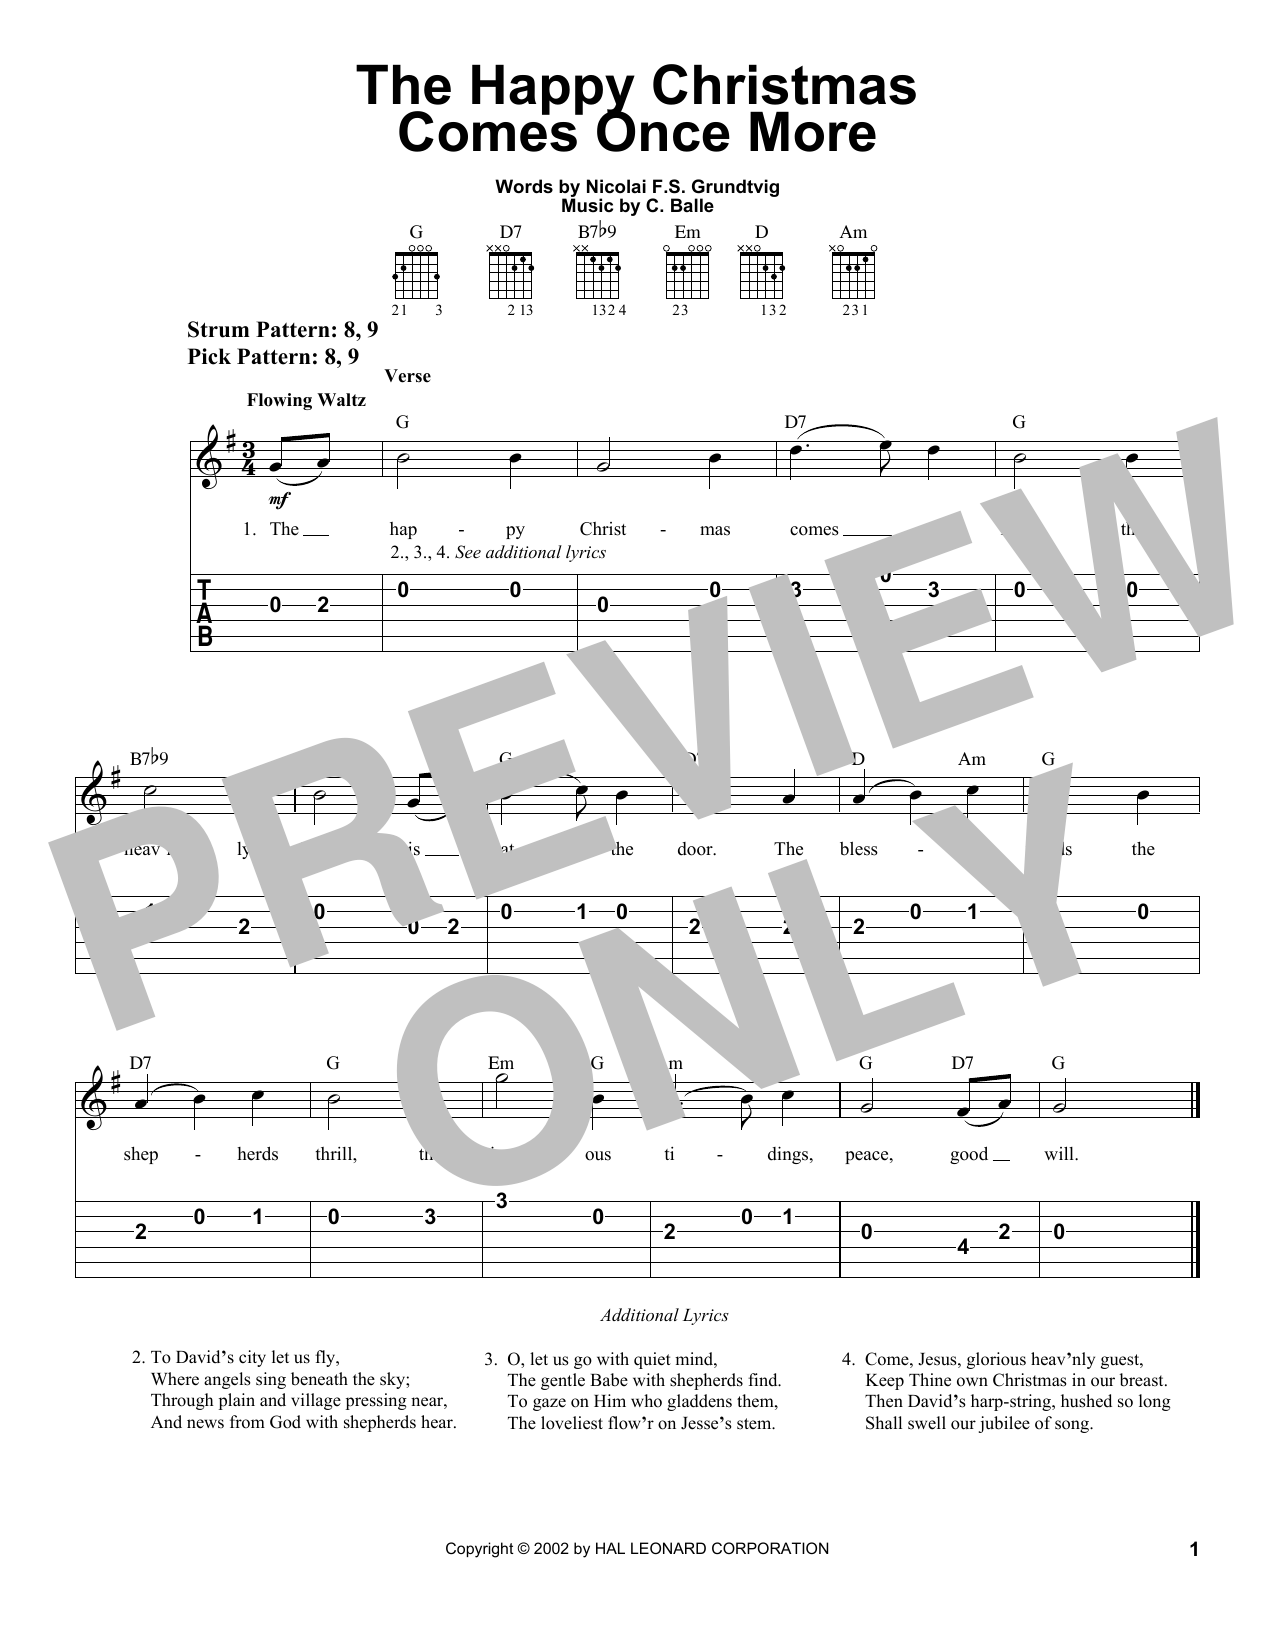 Download Nikolai F.S. Grundtvig The Happy Christmas Comes Once More Sheet Music